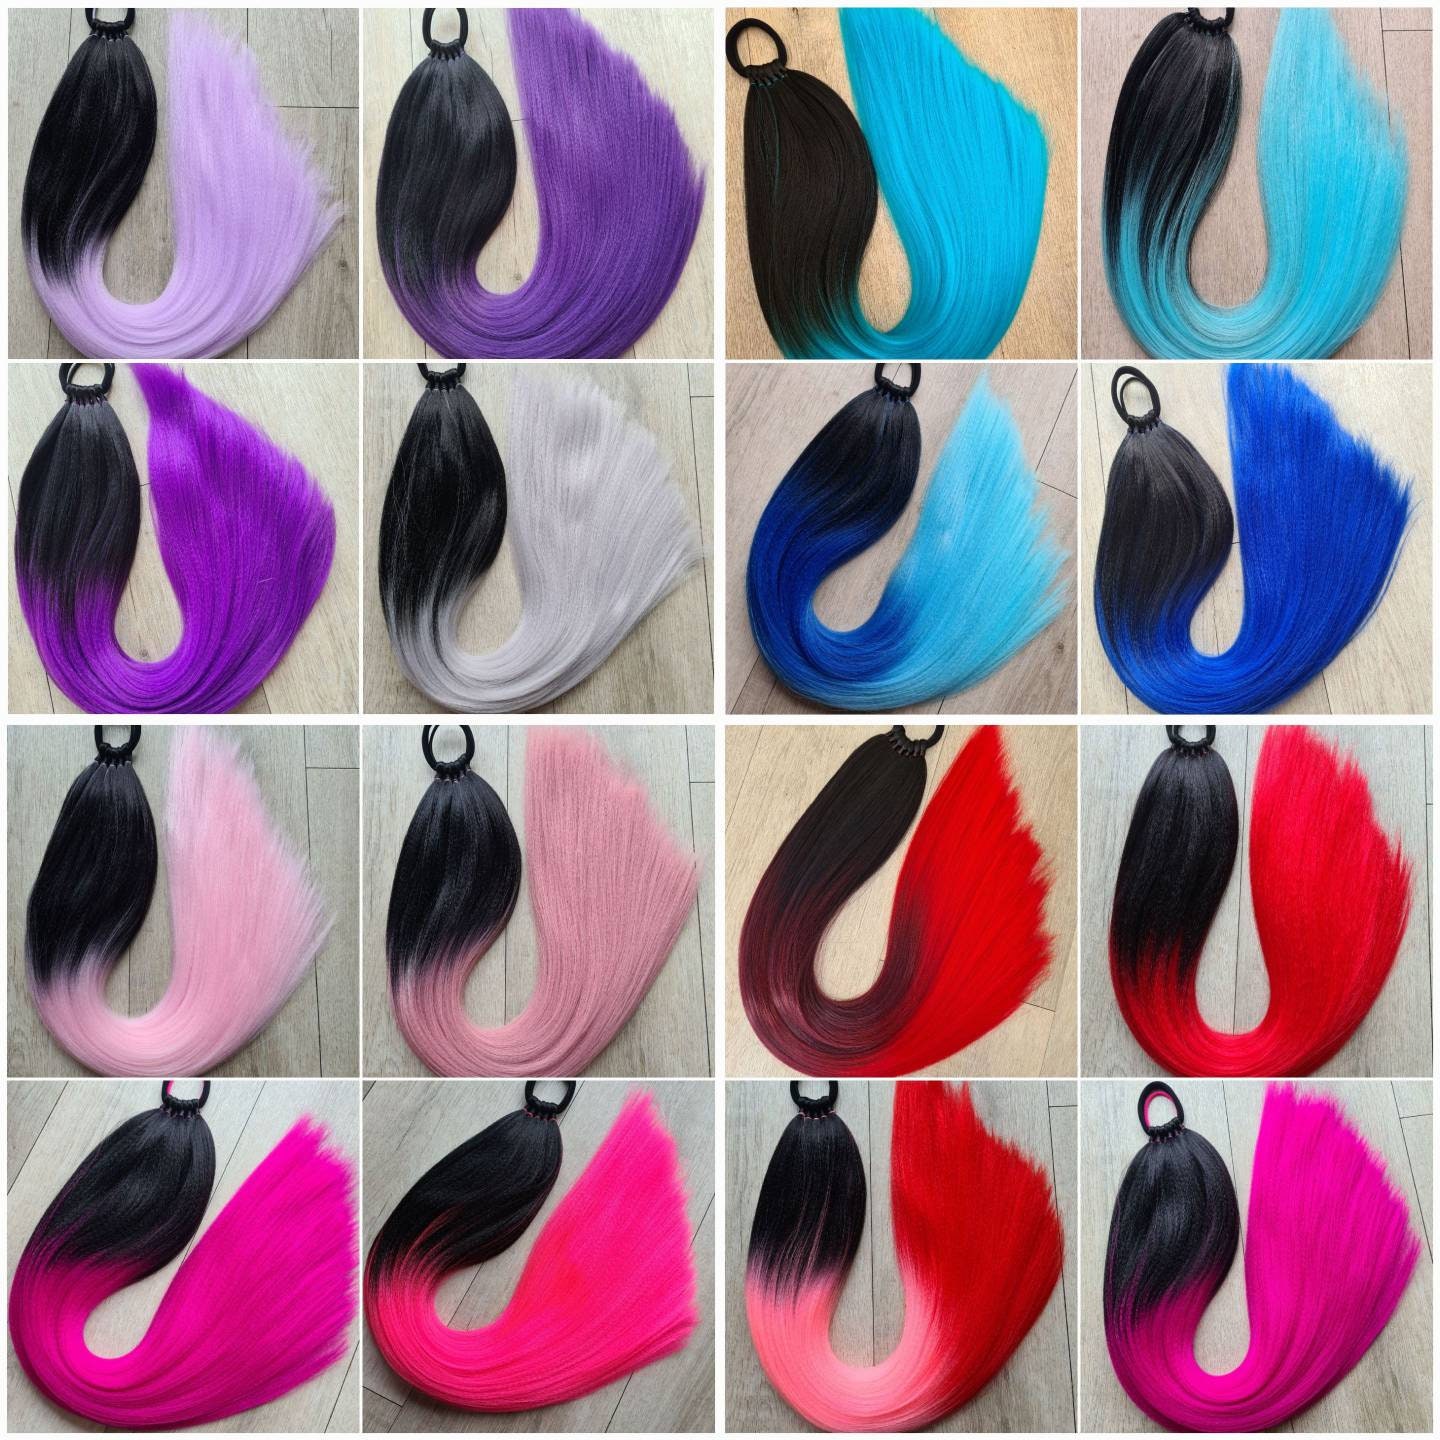 10 Pcs Automatic Hair Beader Ponytail Maker Bead Tool for Hair Styling  Accessories